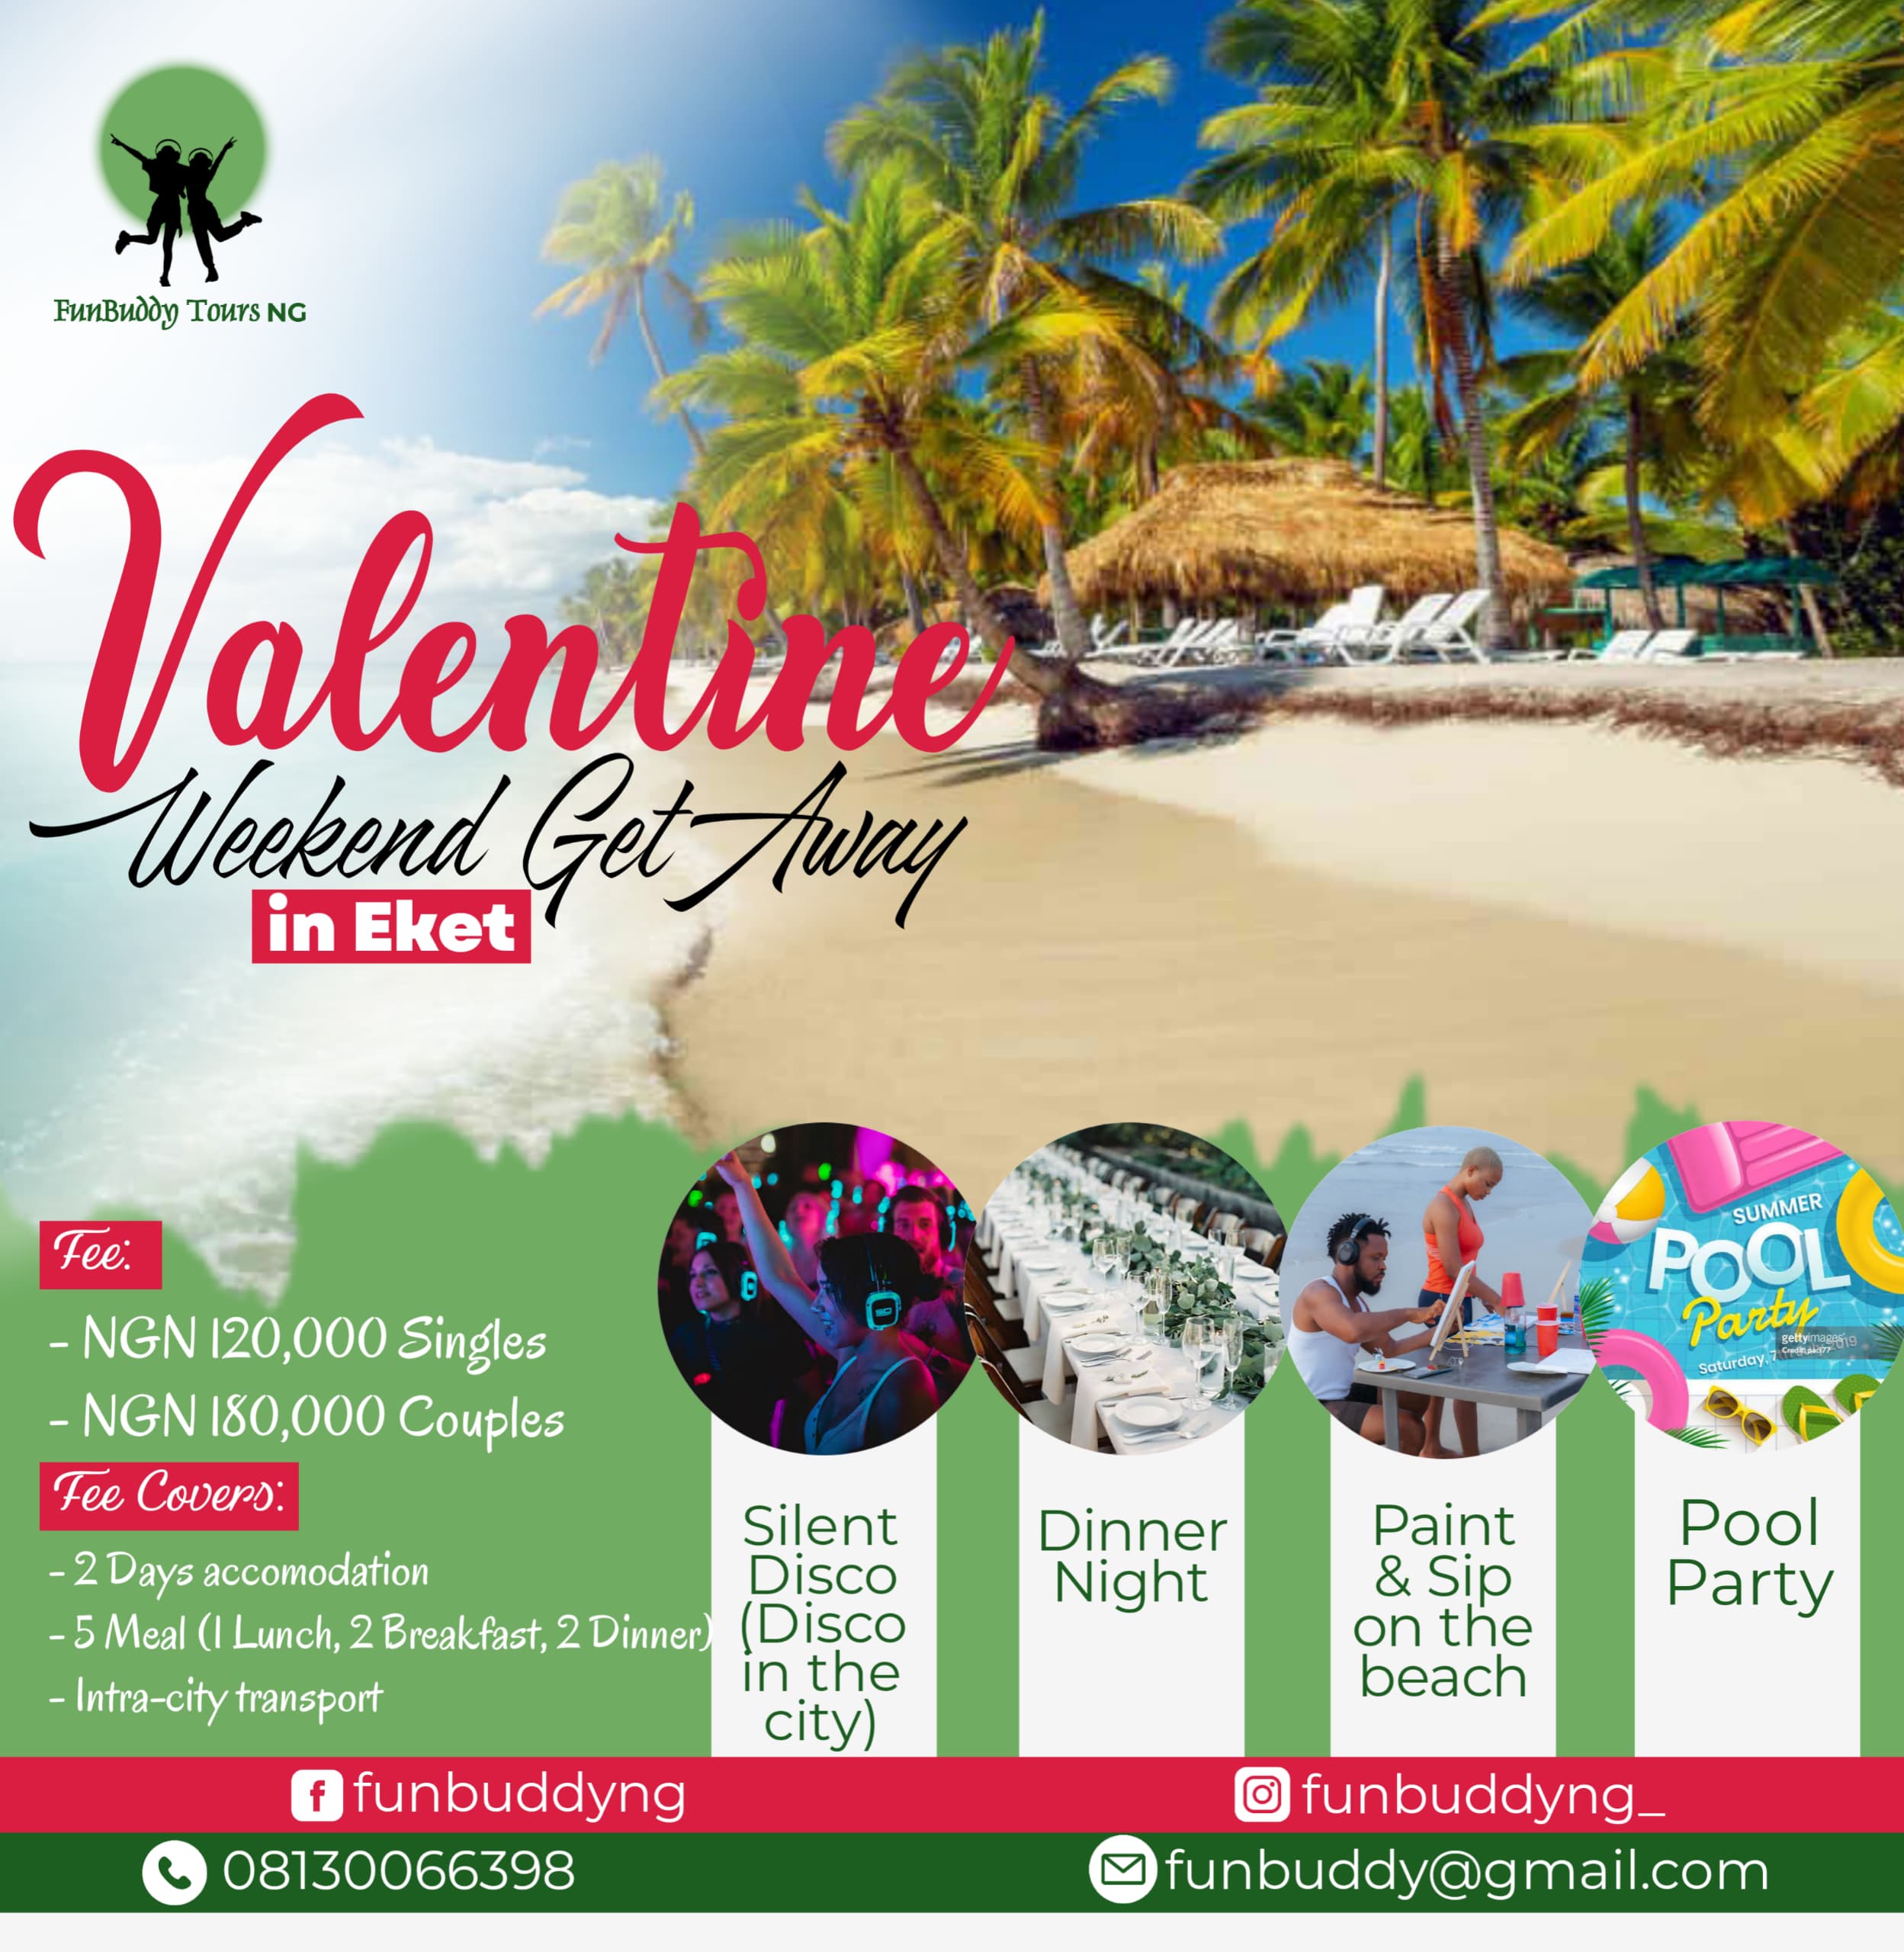 VALENTINE PAINT & SIP @ IBENO BEACH Post free event in Nigeria using tickethub.ng, buy and sell tickets to event